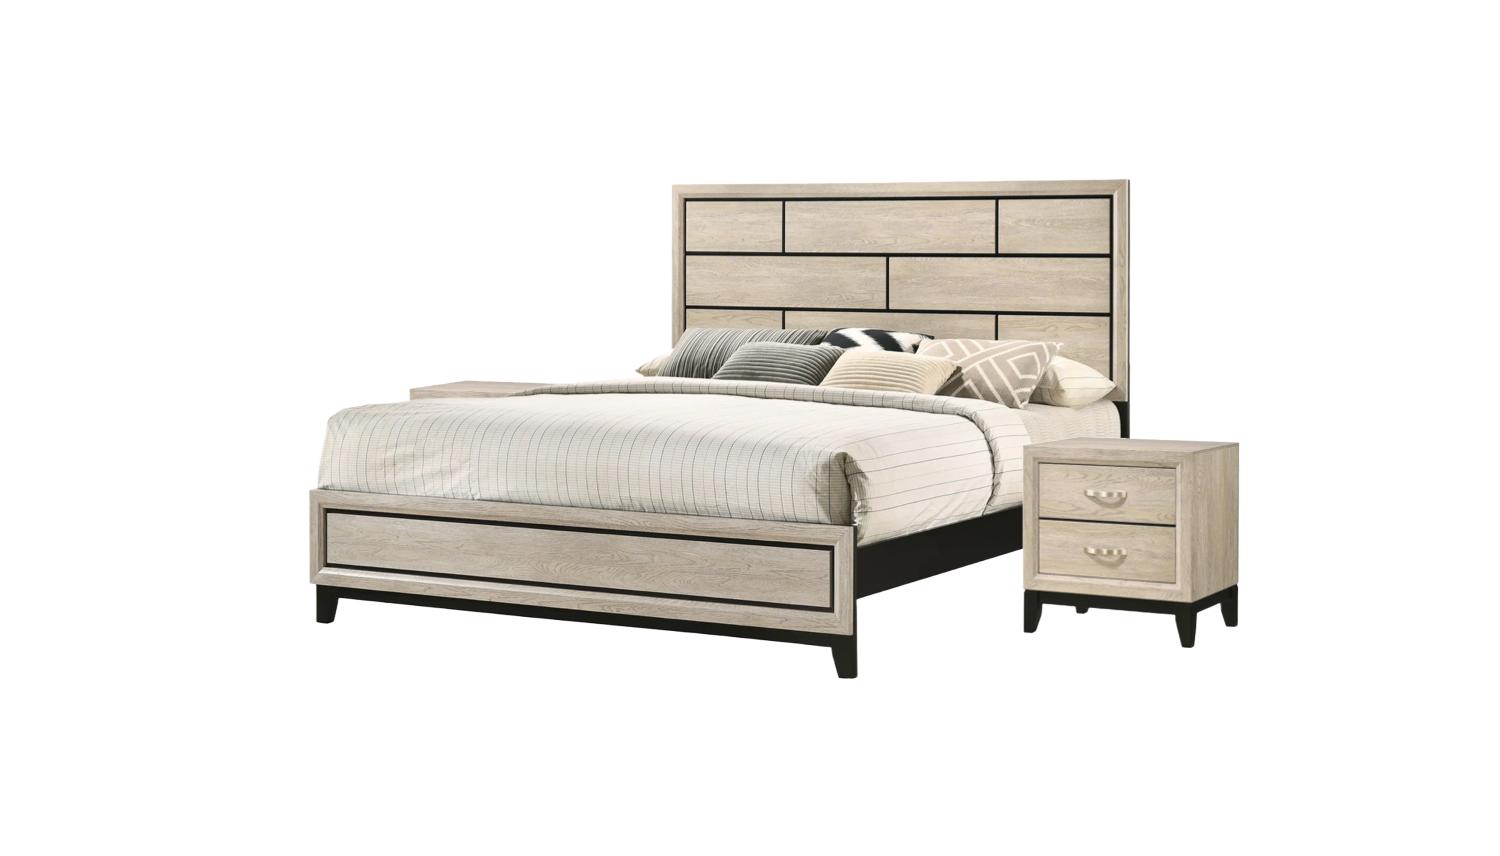 Contemporary, Simple Panel Bedroom Set Akerson B4630-CK-Bed-3pcs in Beige 